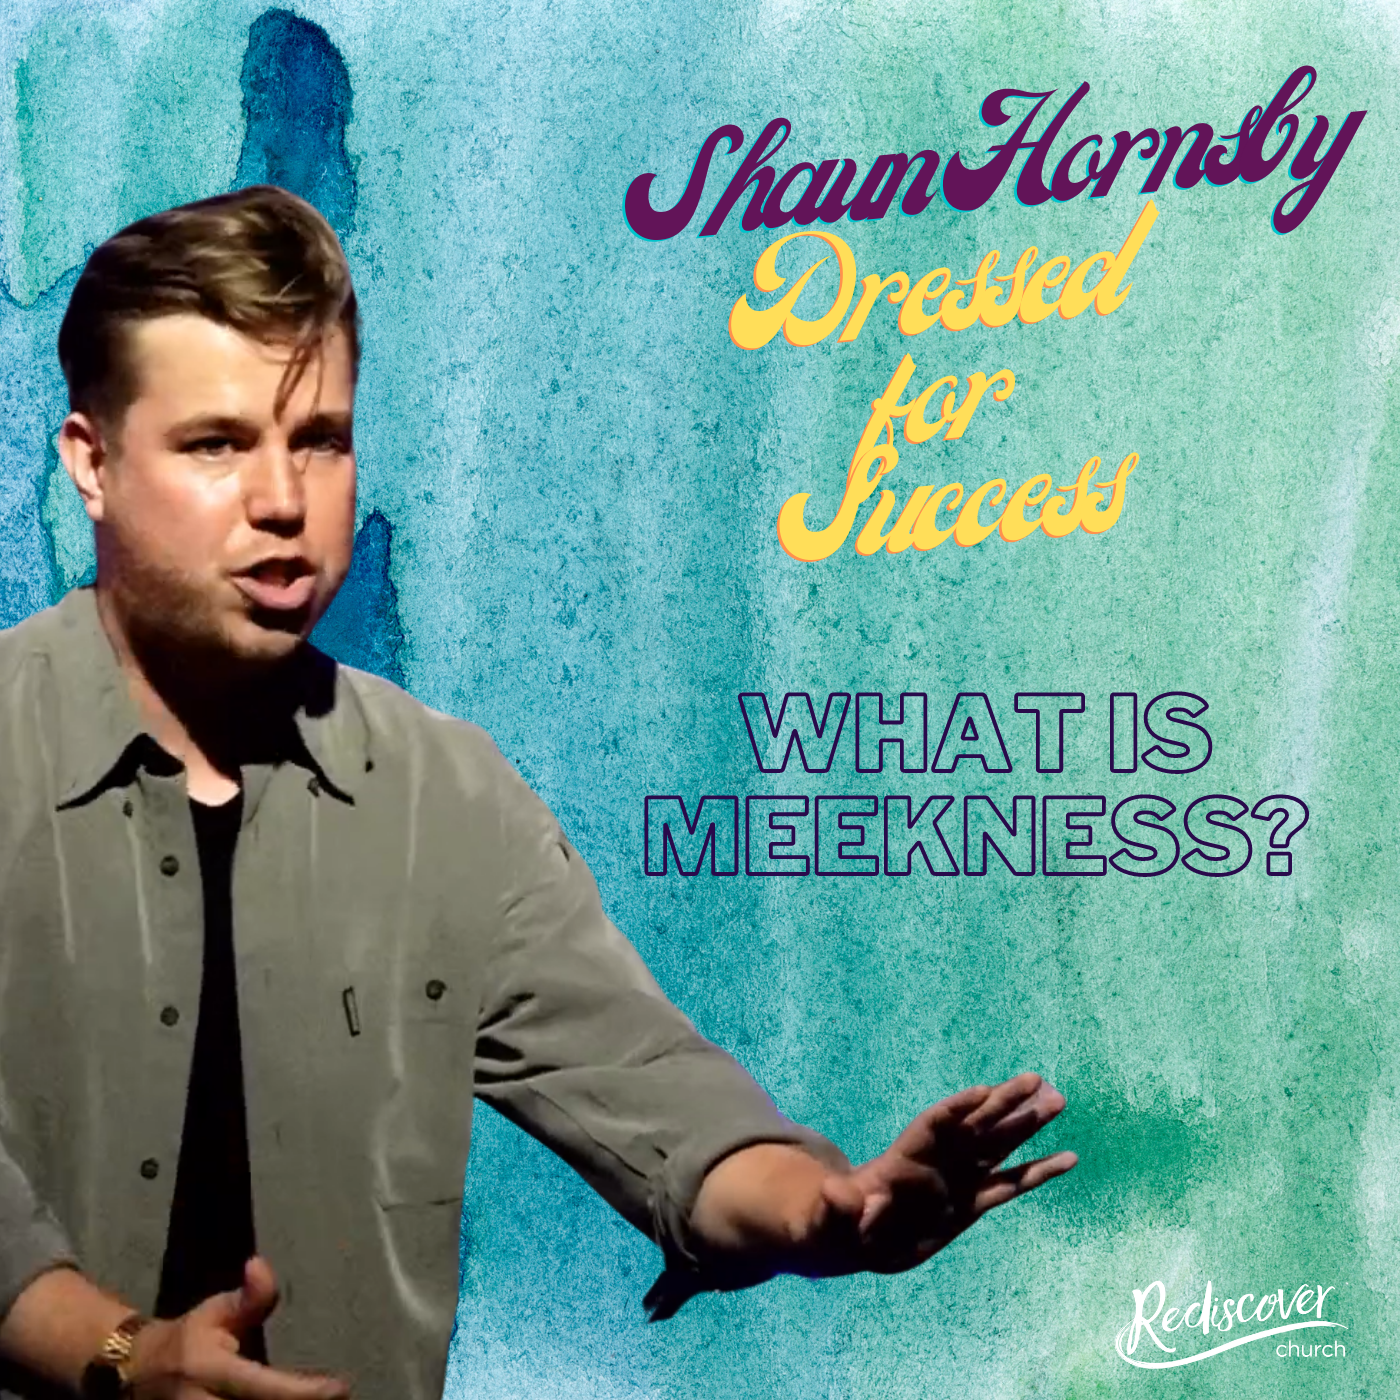 Shaun Hornsby - Sunday Message | Dressed for Success | What is Meekness?